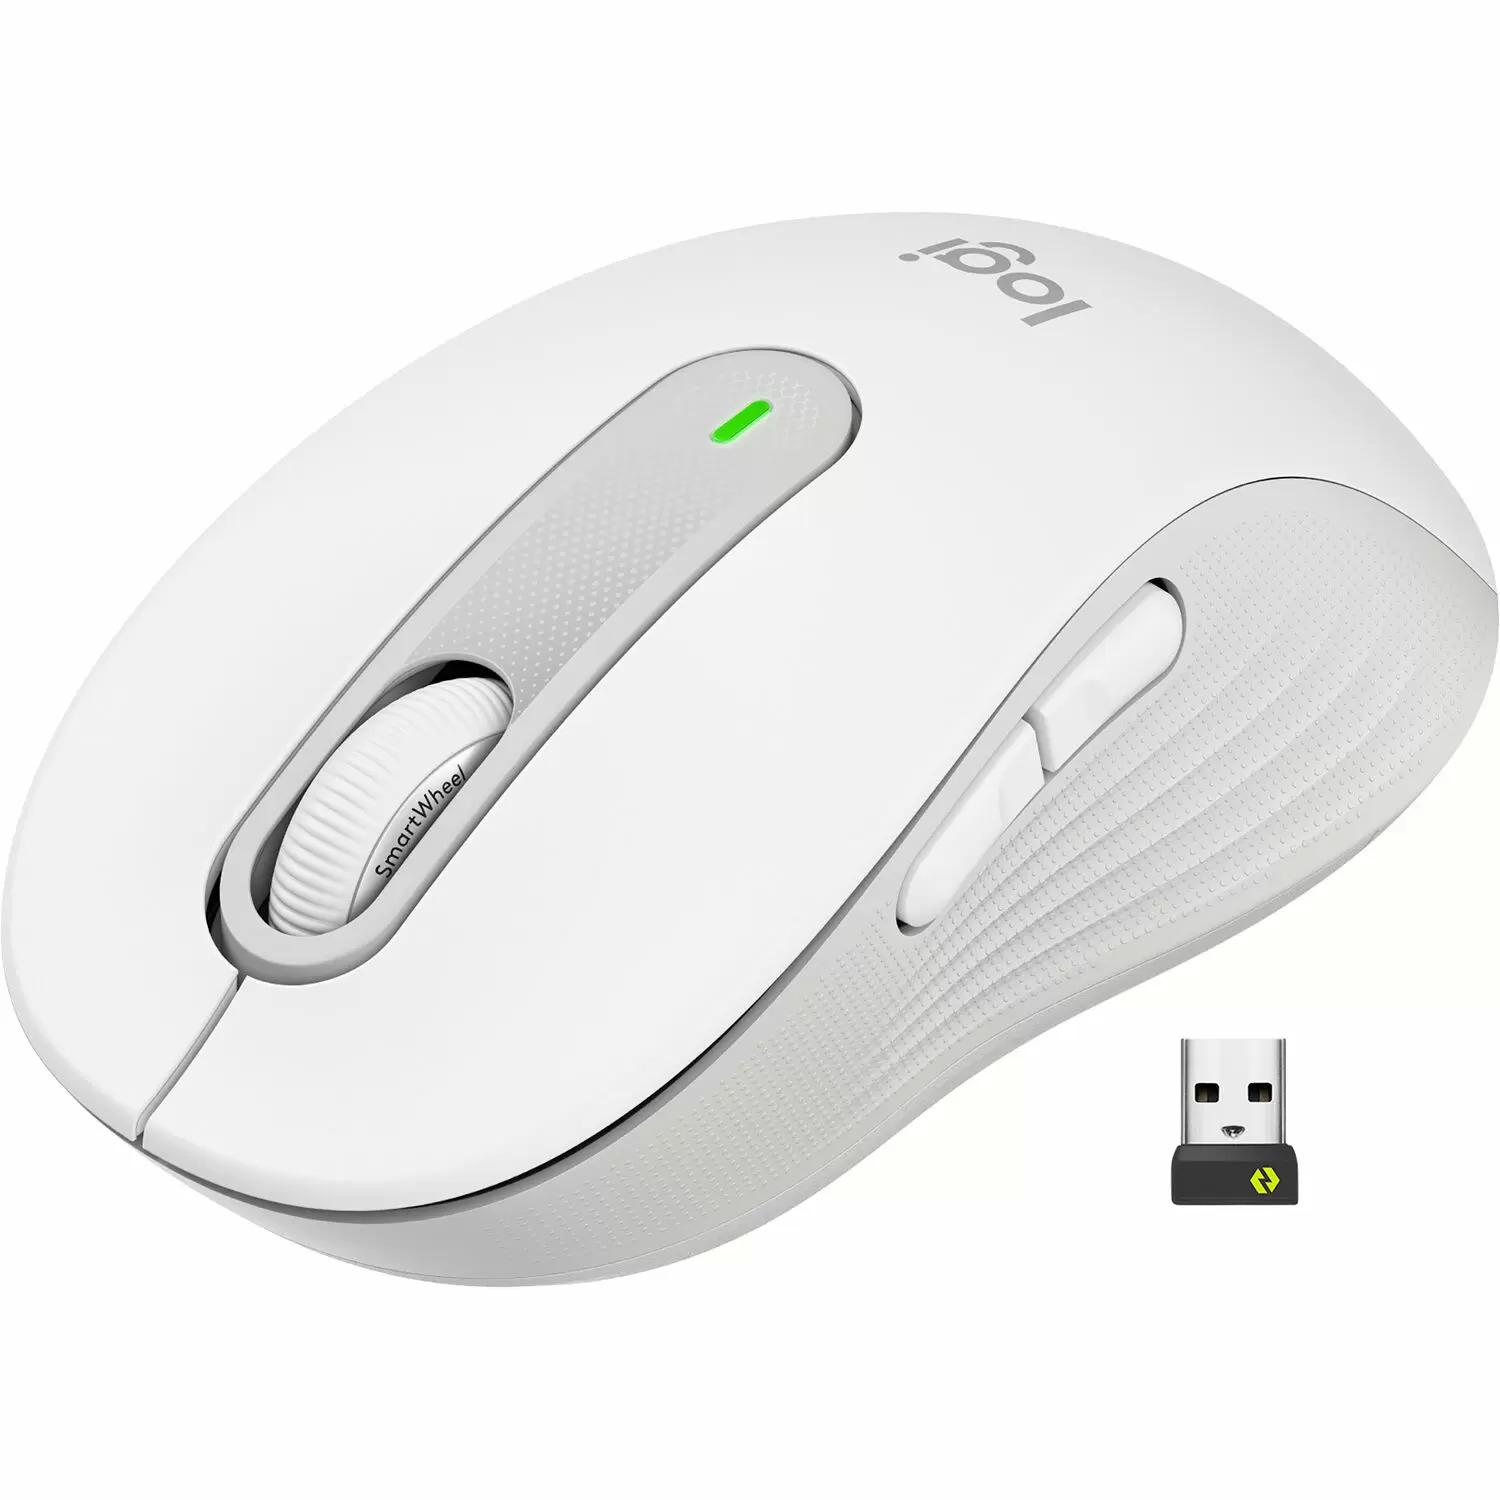 Logitech Signature M650 SilentTouch Wireless Mouse for $19.99